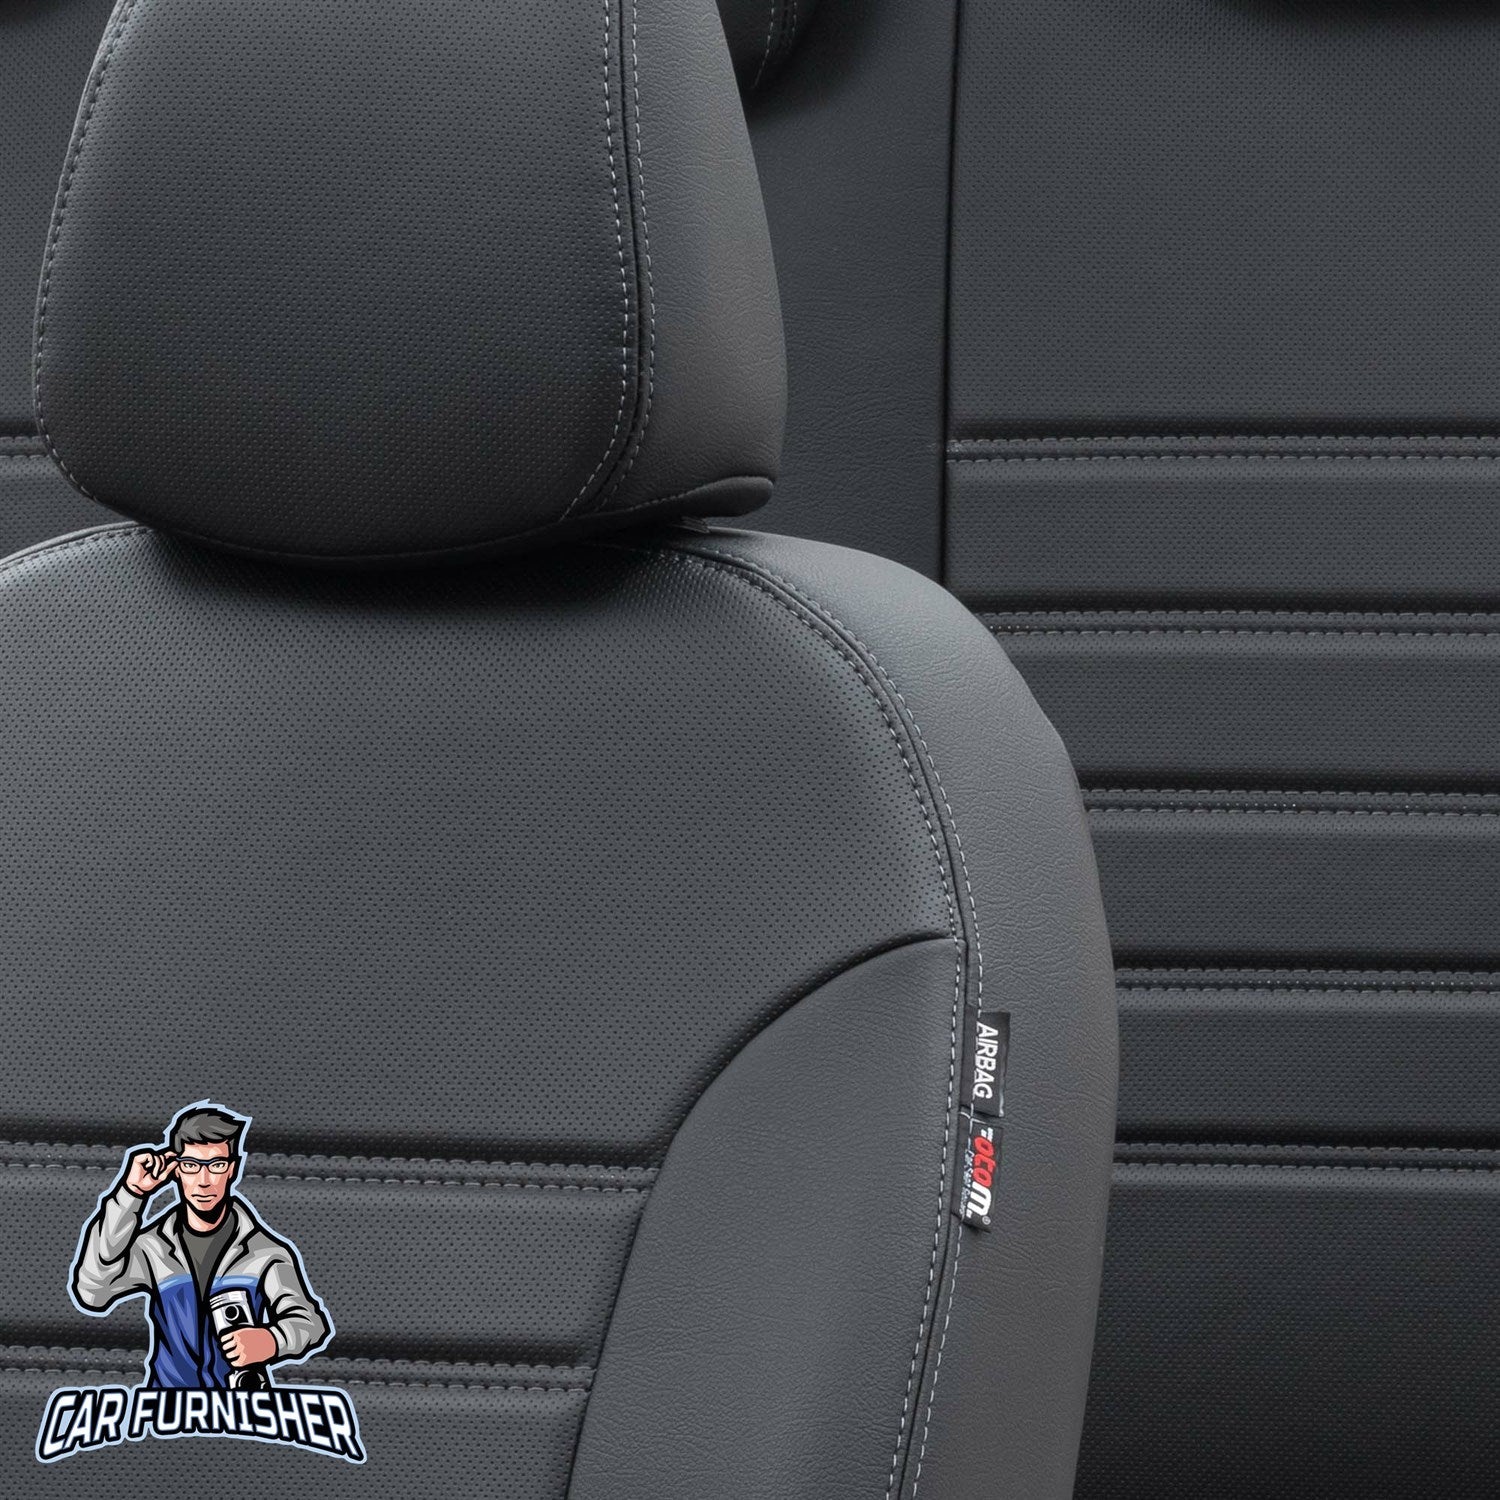 Volkswagen Sharan Seat Cover Istanbul Leather Design Black Leather